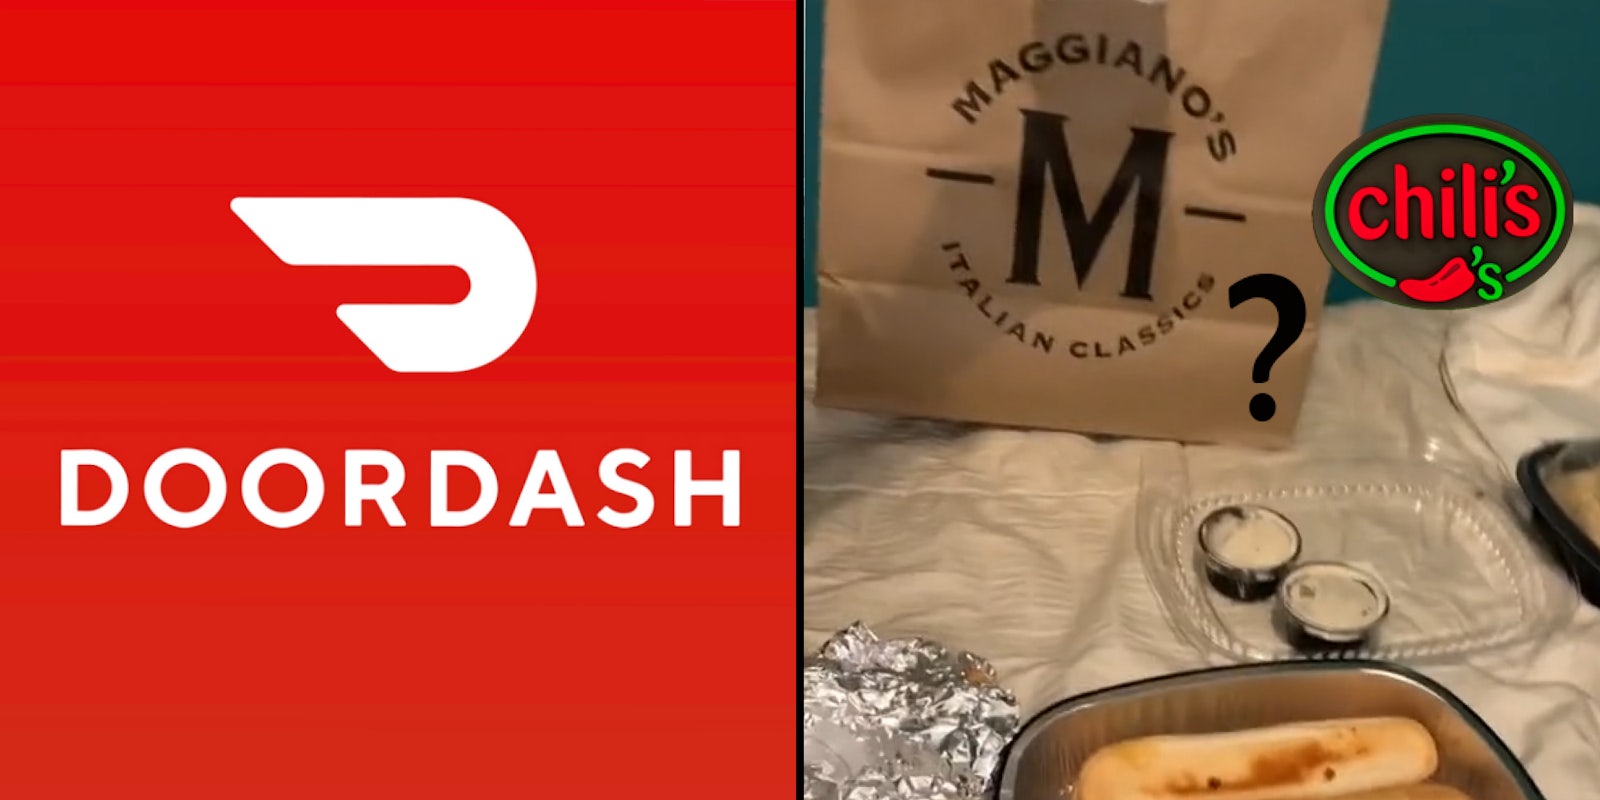 DoorDash logo on red background (l) food on bed Maggiano's food bag and logo with question mark between that logo and a chilis logo, question mark between both logos